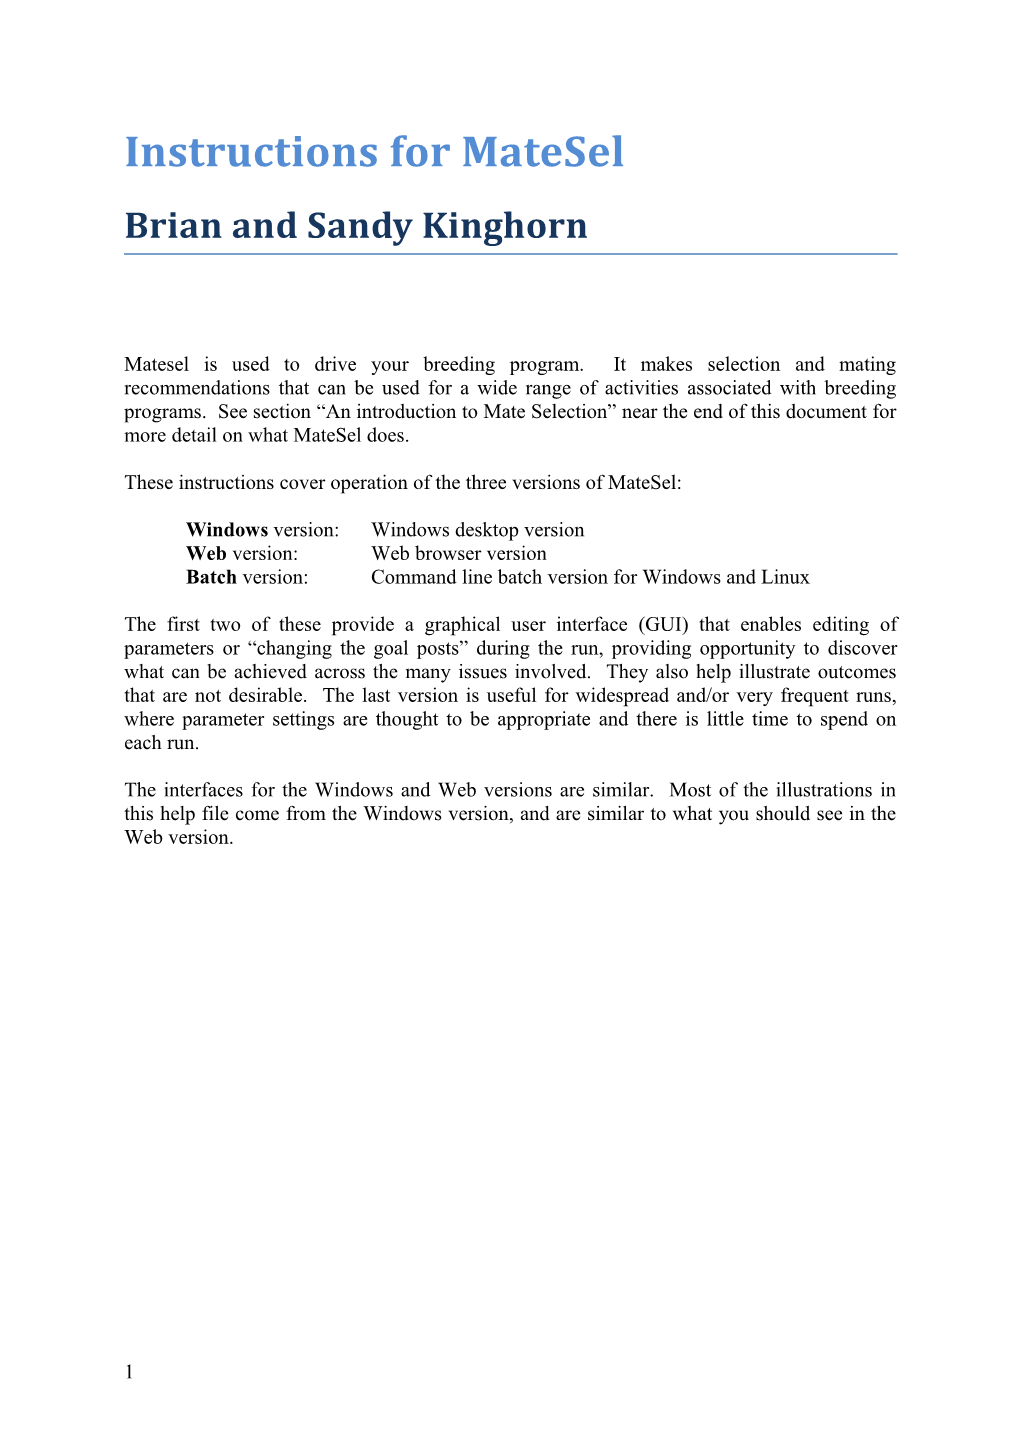 Brian and Sandy Kinghorn